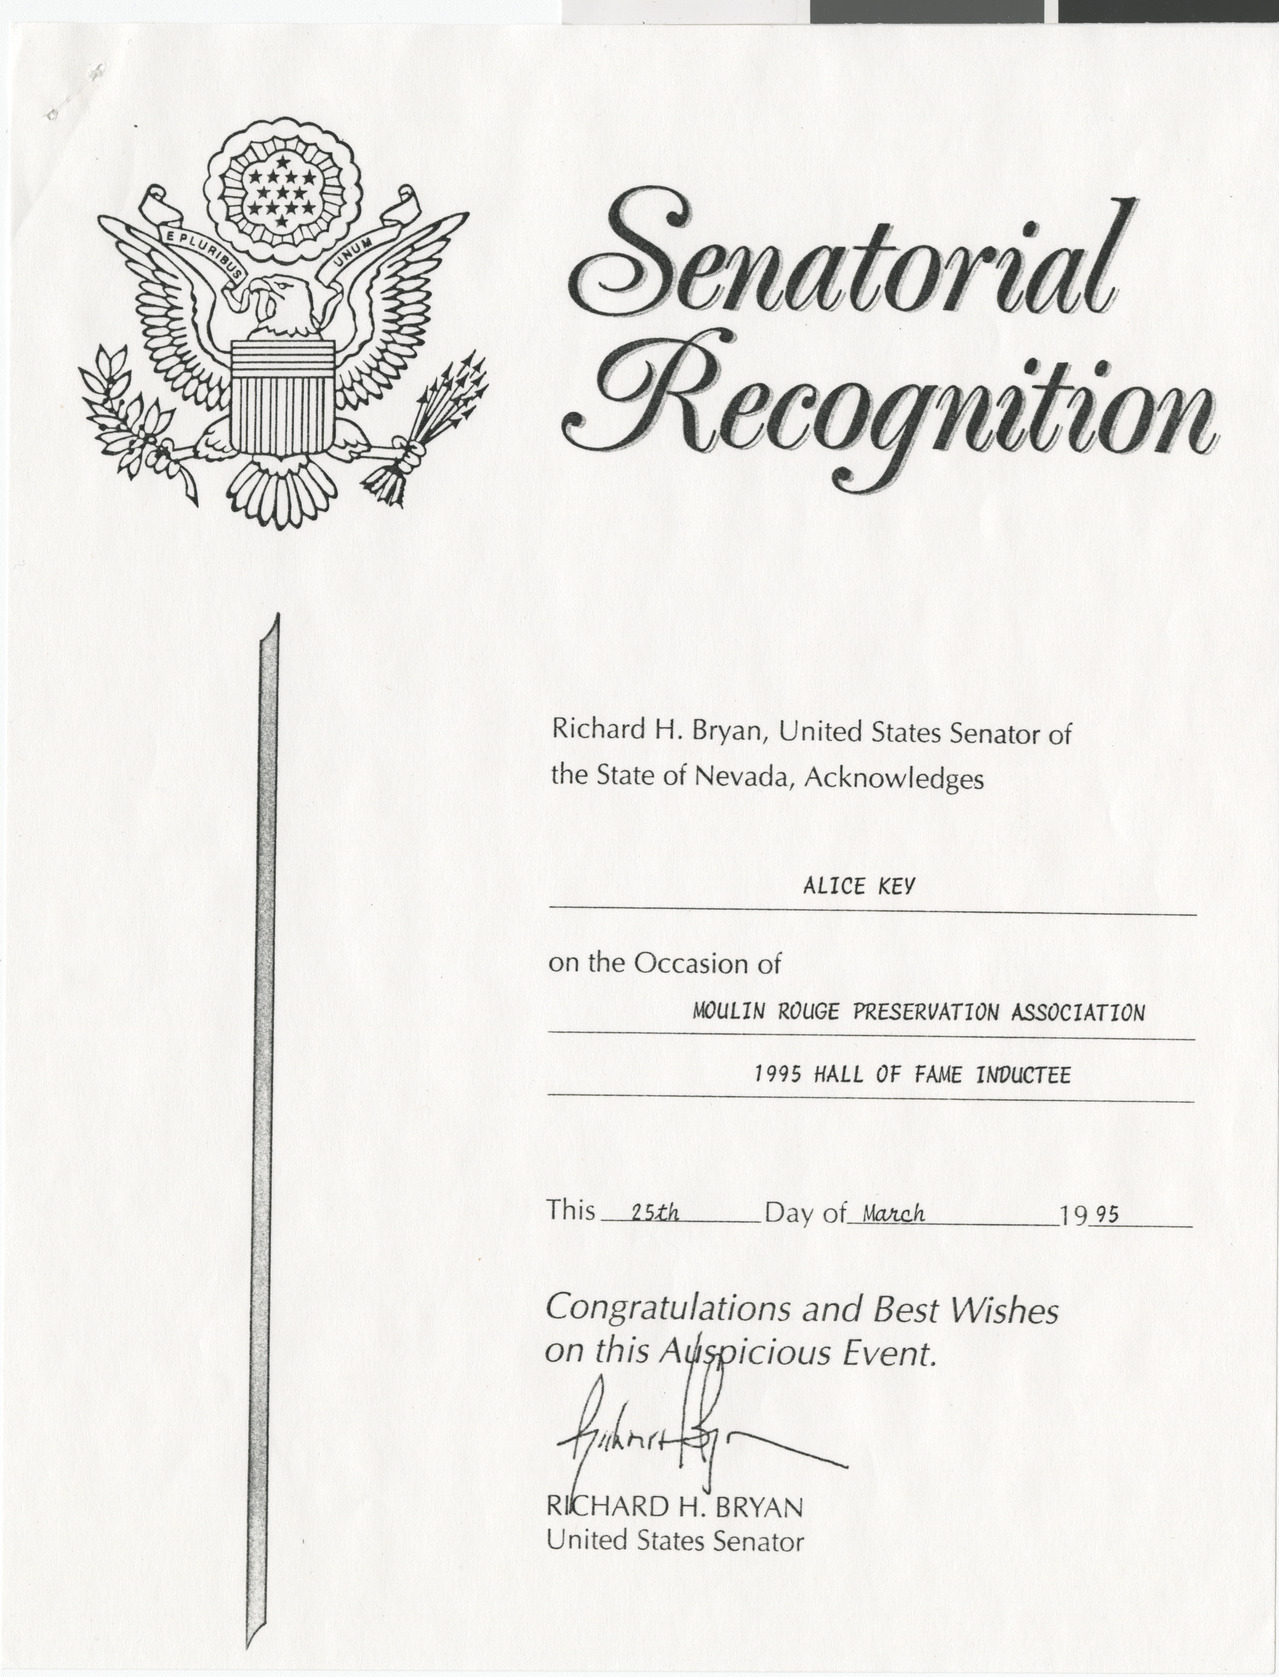 Photocopy of Senatorial Recognition for Alice Key for her induction into the Moulin Rouge Preservation Association Hall of Fame, 1995 (see also Box 1  Folder 13 Item 7)